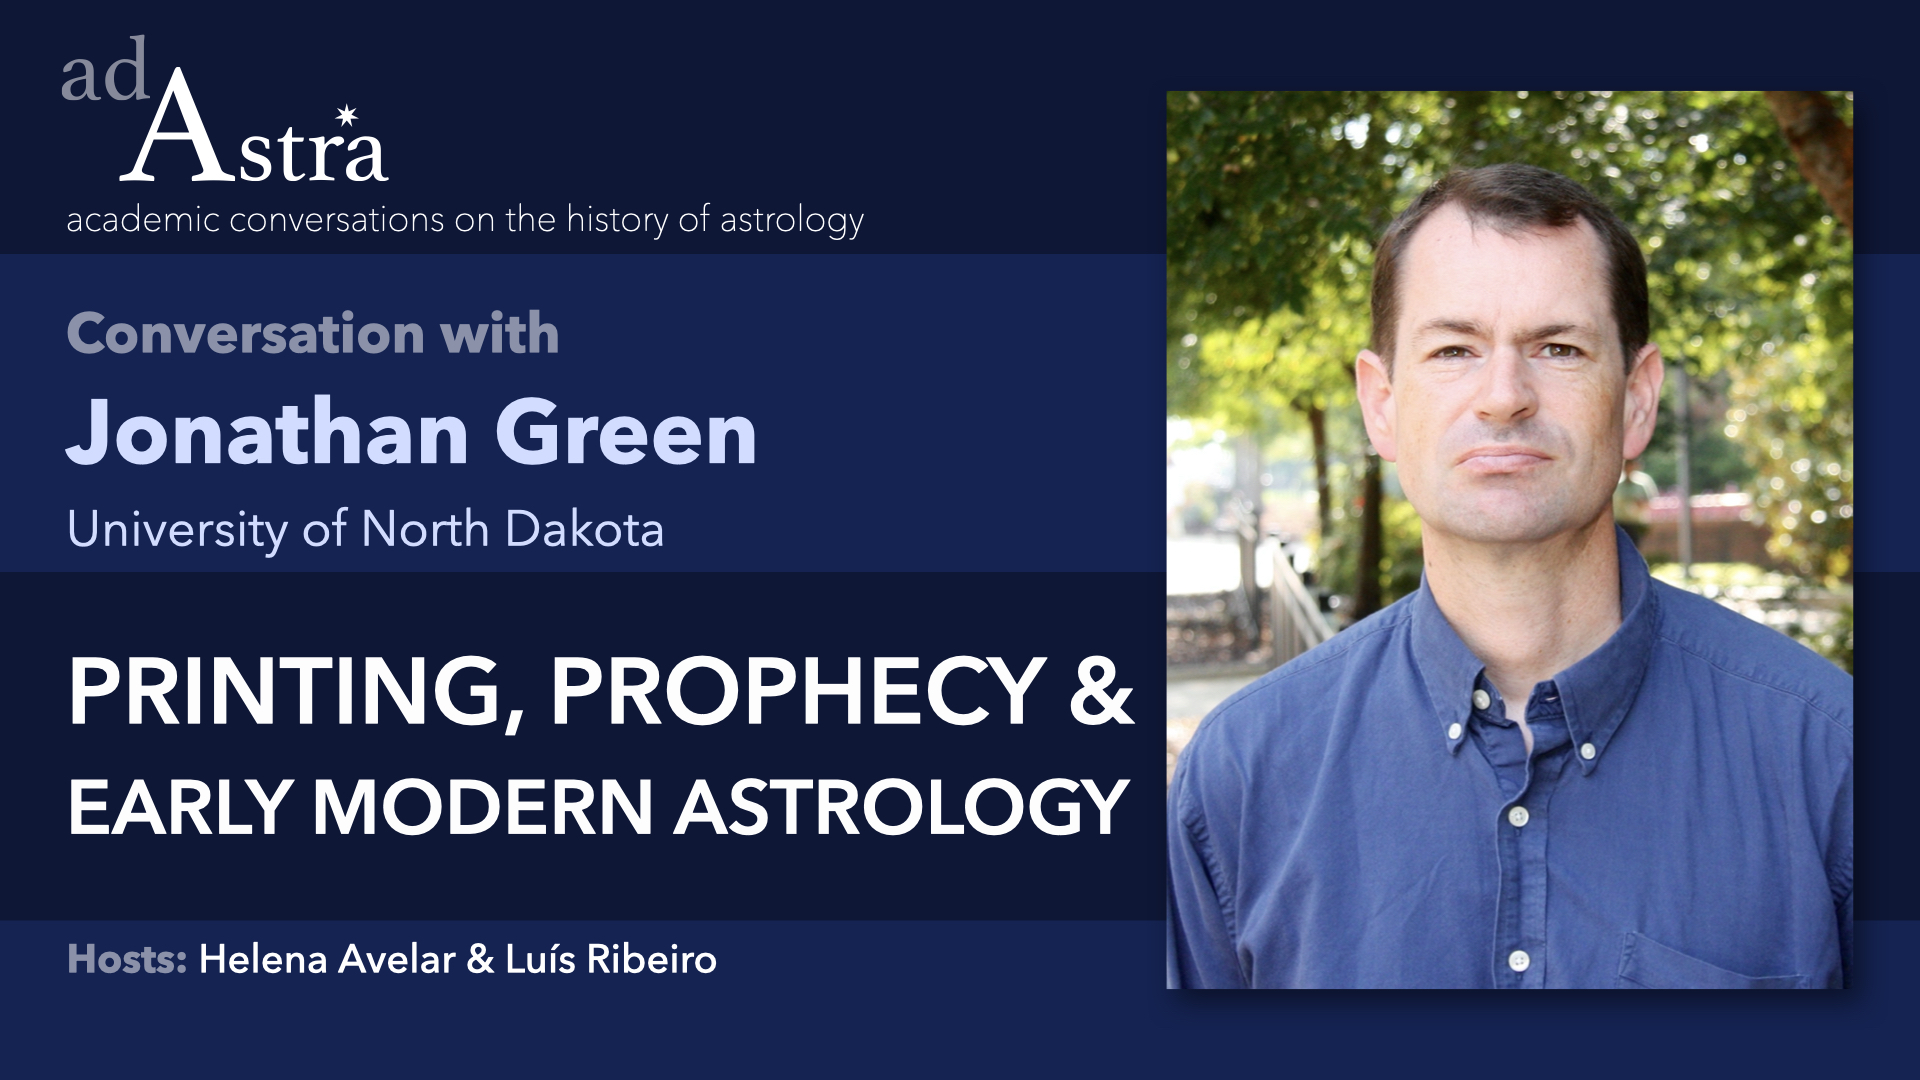 Printing, Prophecy & Early Modern Astrology with Jonathan Green